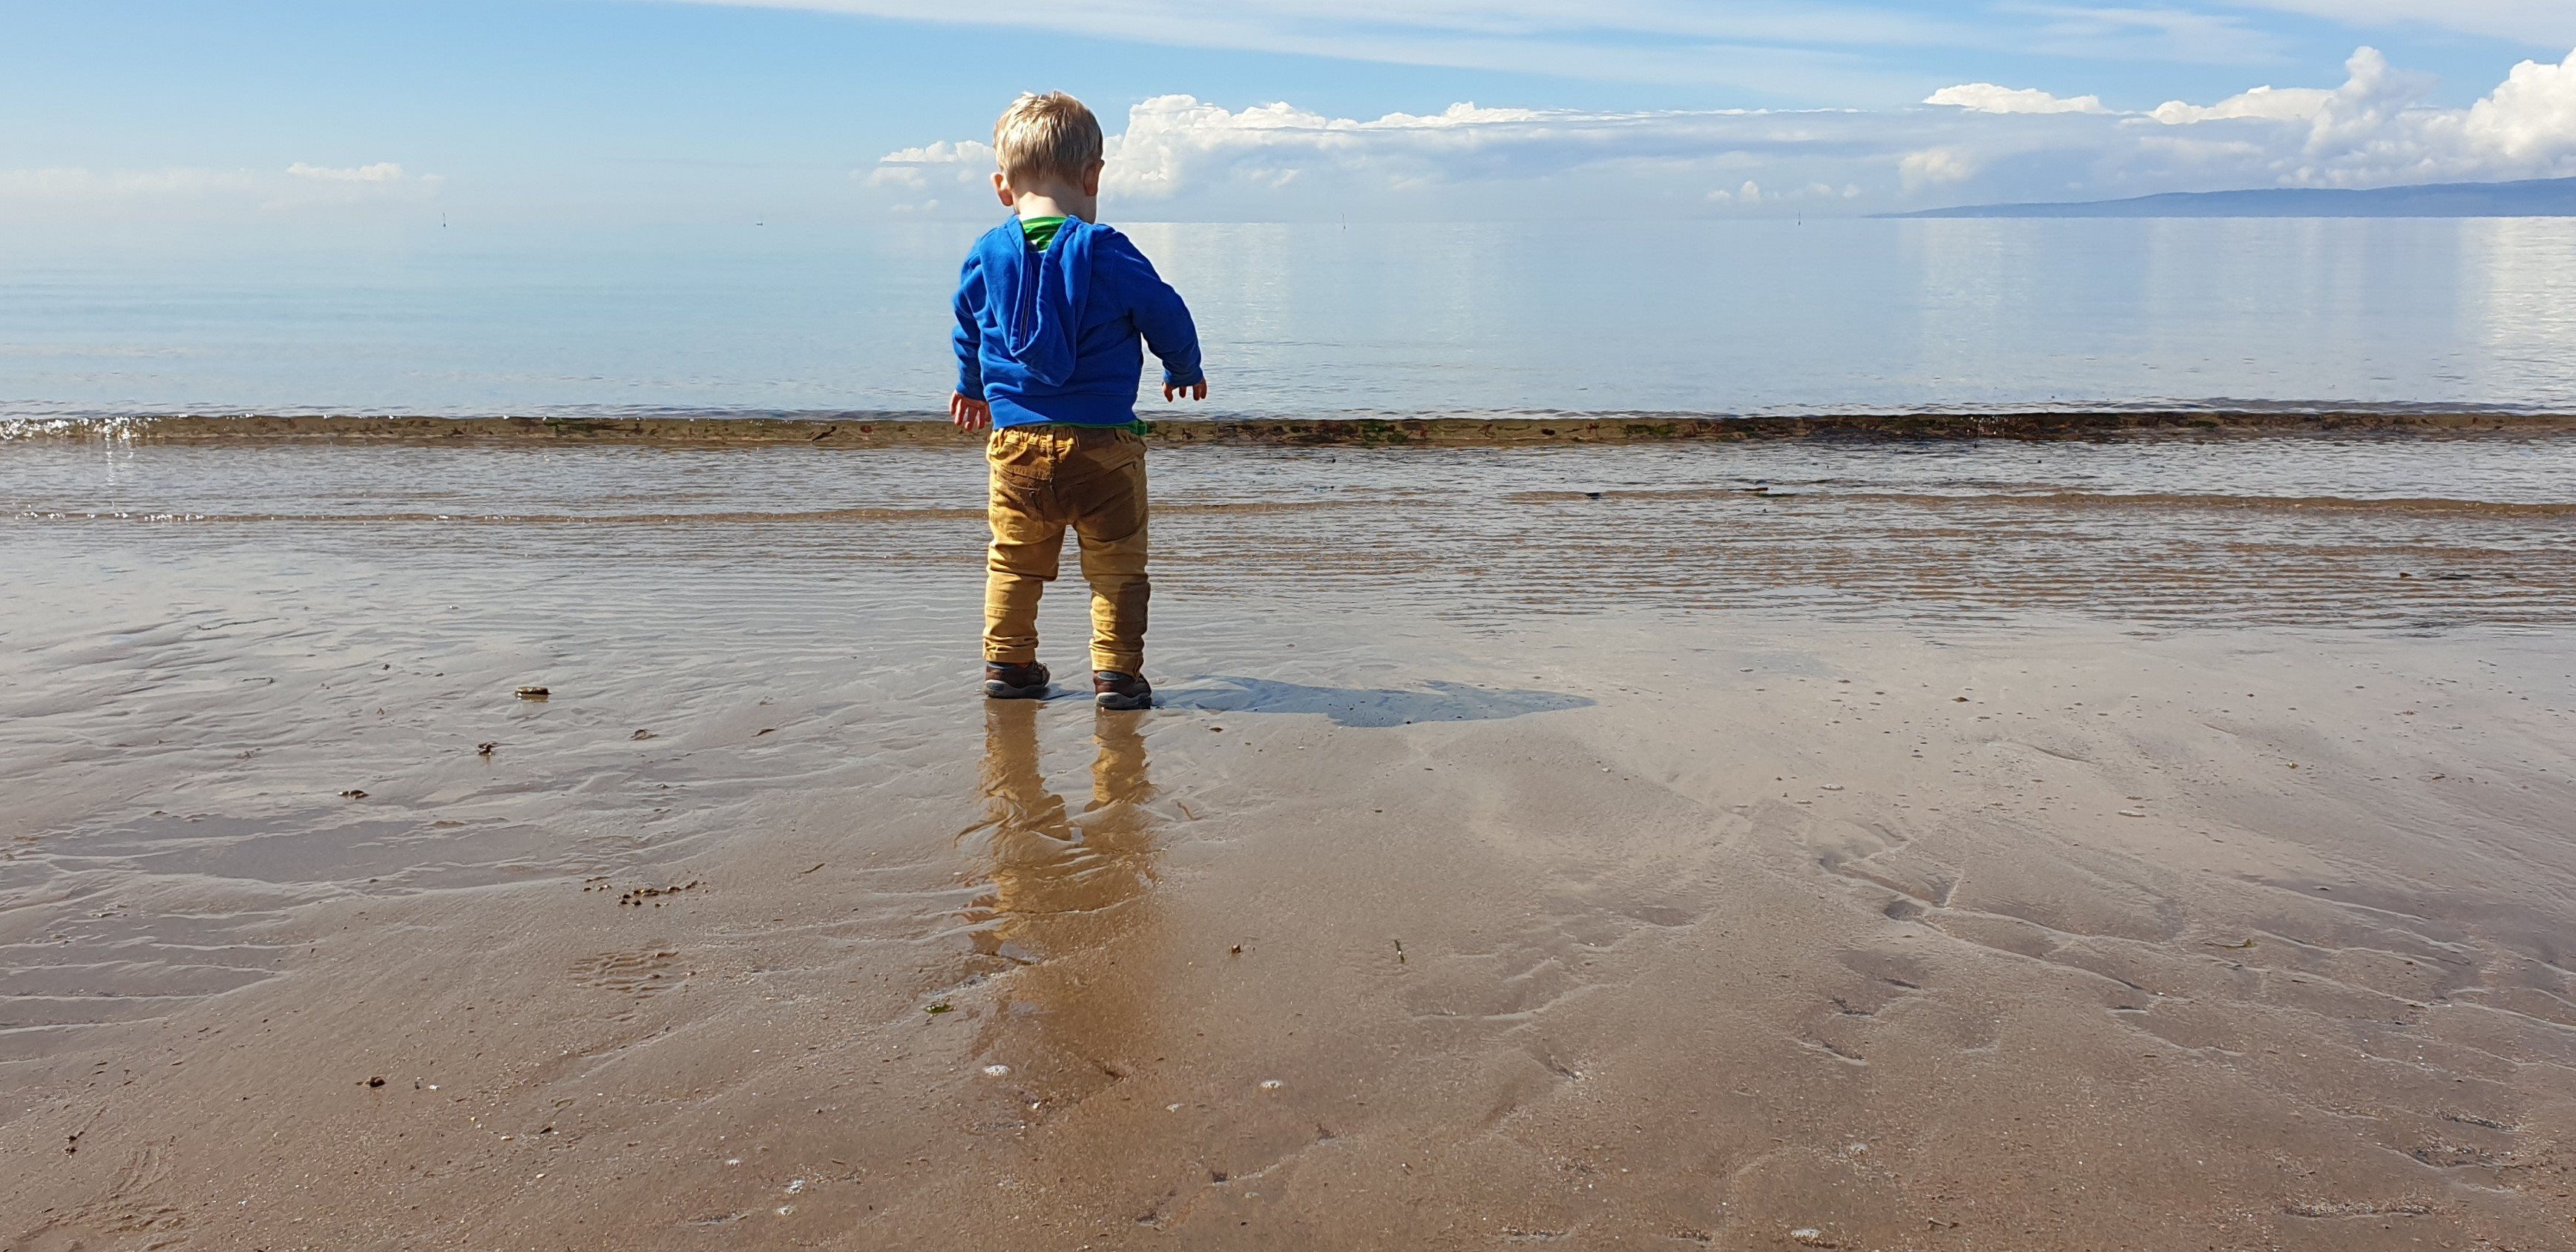 Image of a child testing the waters at a beach